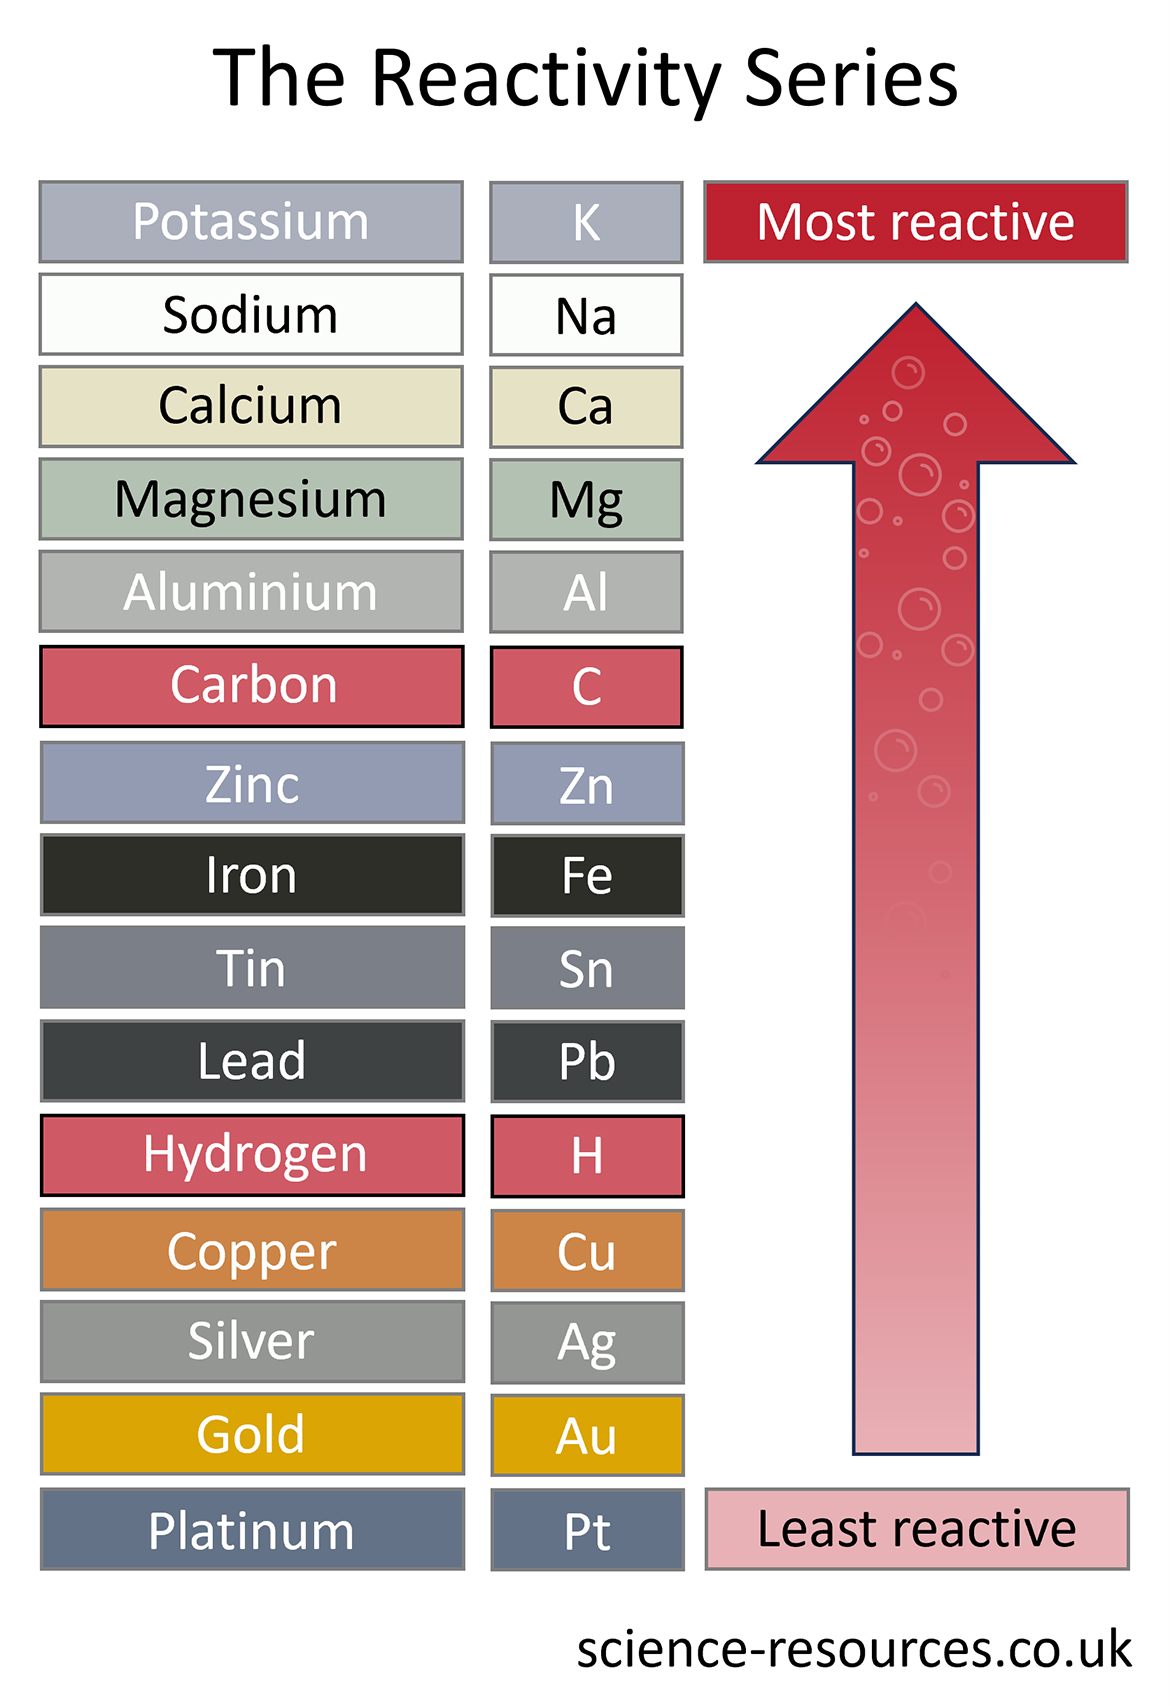 This image is a colorful chart titled “The Reactivity Series,” which ranks various elements according to their reactivity, from most to least reactive. It includes the elements’ names, symbols, and a color-coded ranking.